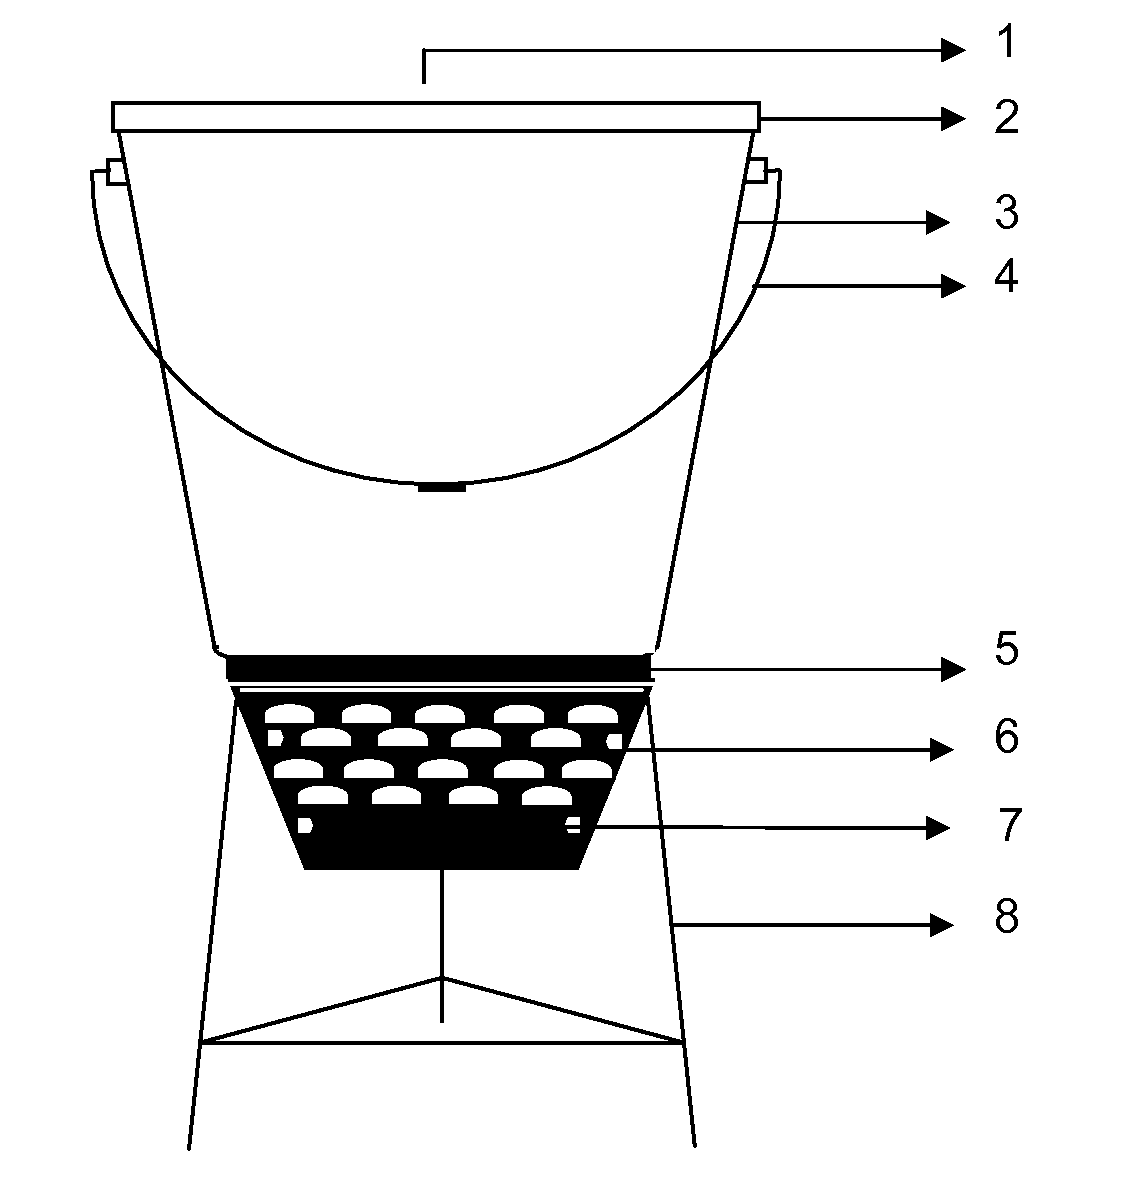 Device for the Storage and Treatment of Biodegradable Wet Solid Waste